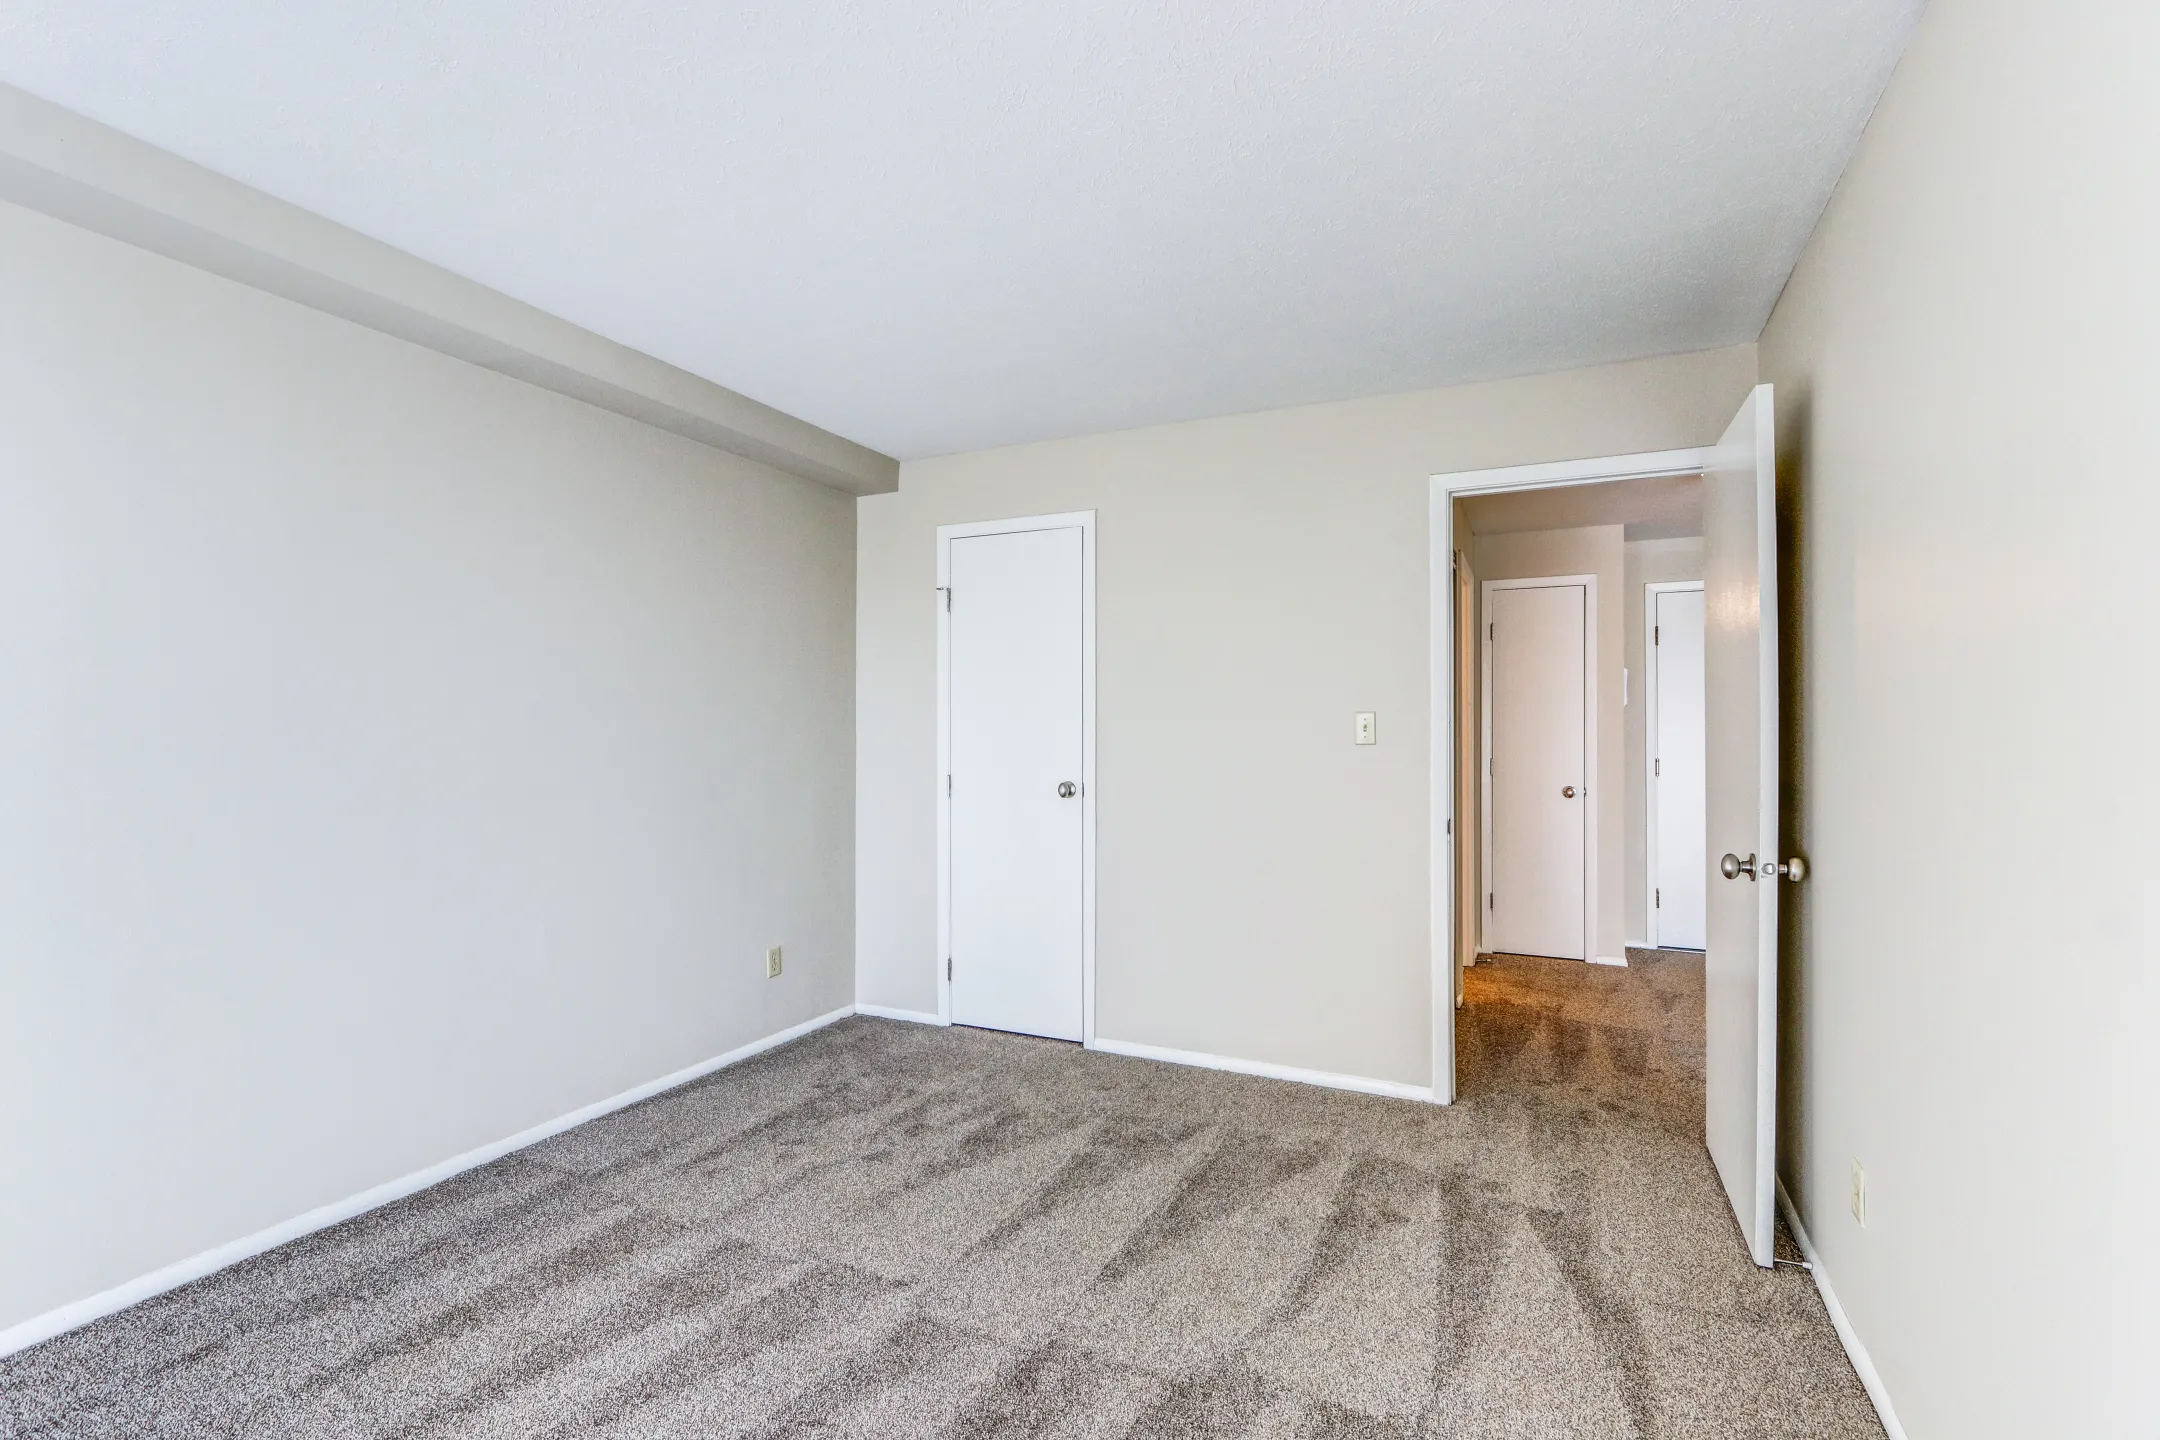 Bedroom - Concord Apartments - Cleveland Heights, OH